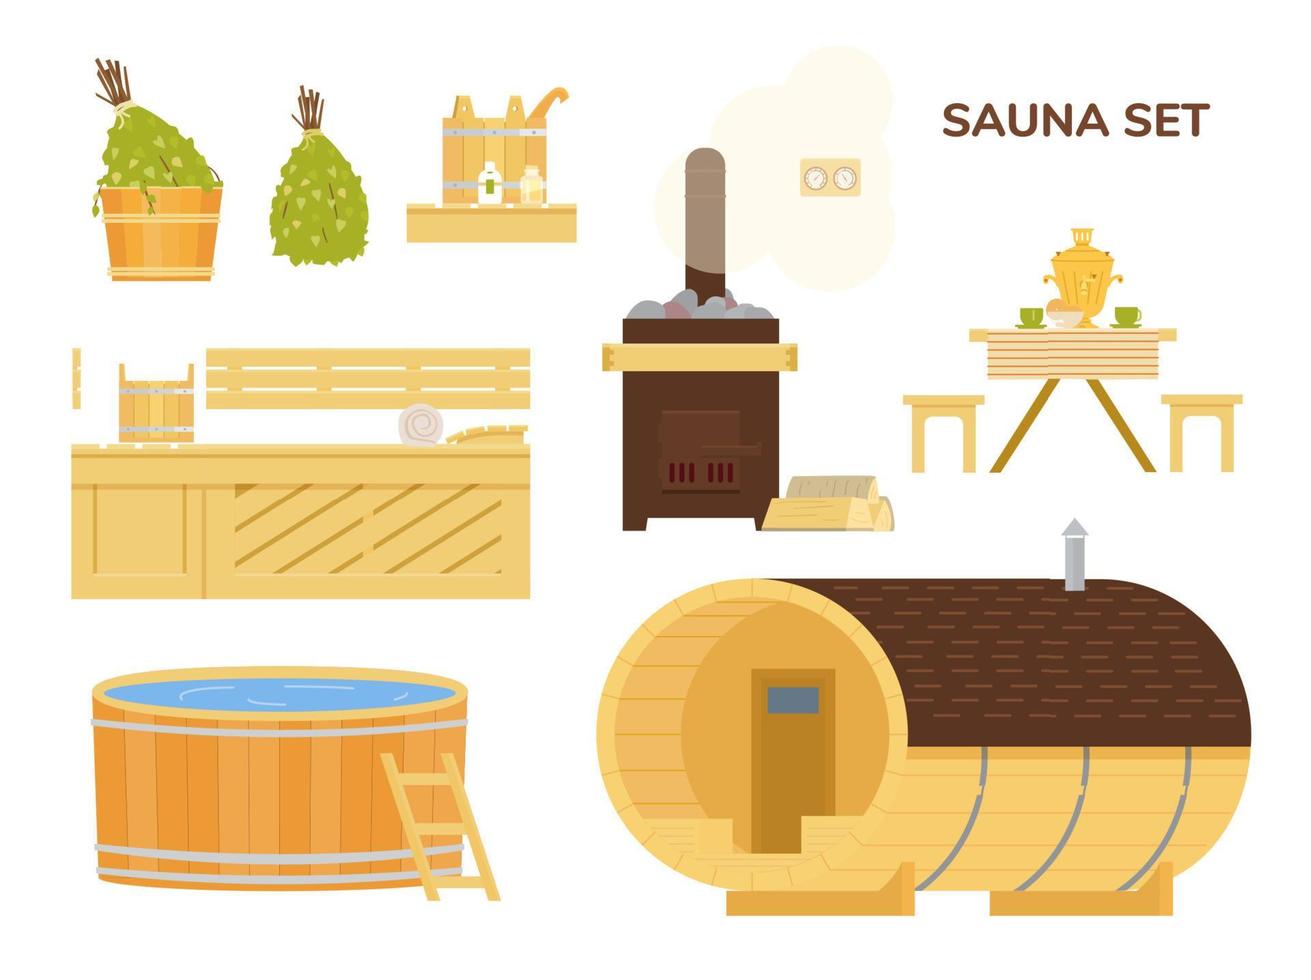 Flat Vector Sauna Elements Set. Wooden Bathhouse, Pool, Bath Barrel, Tea Table With Samovar, Birch Brooms, Stove With Firewood, Buckets, Thermometer, Eseential Oils.